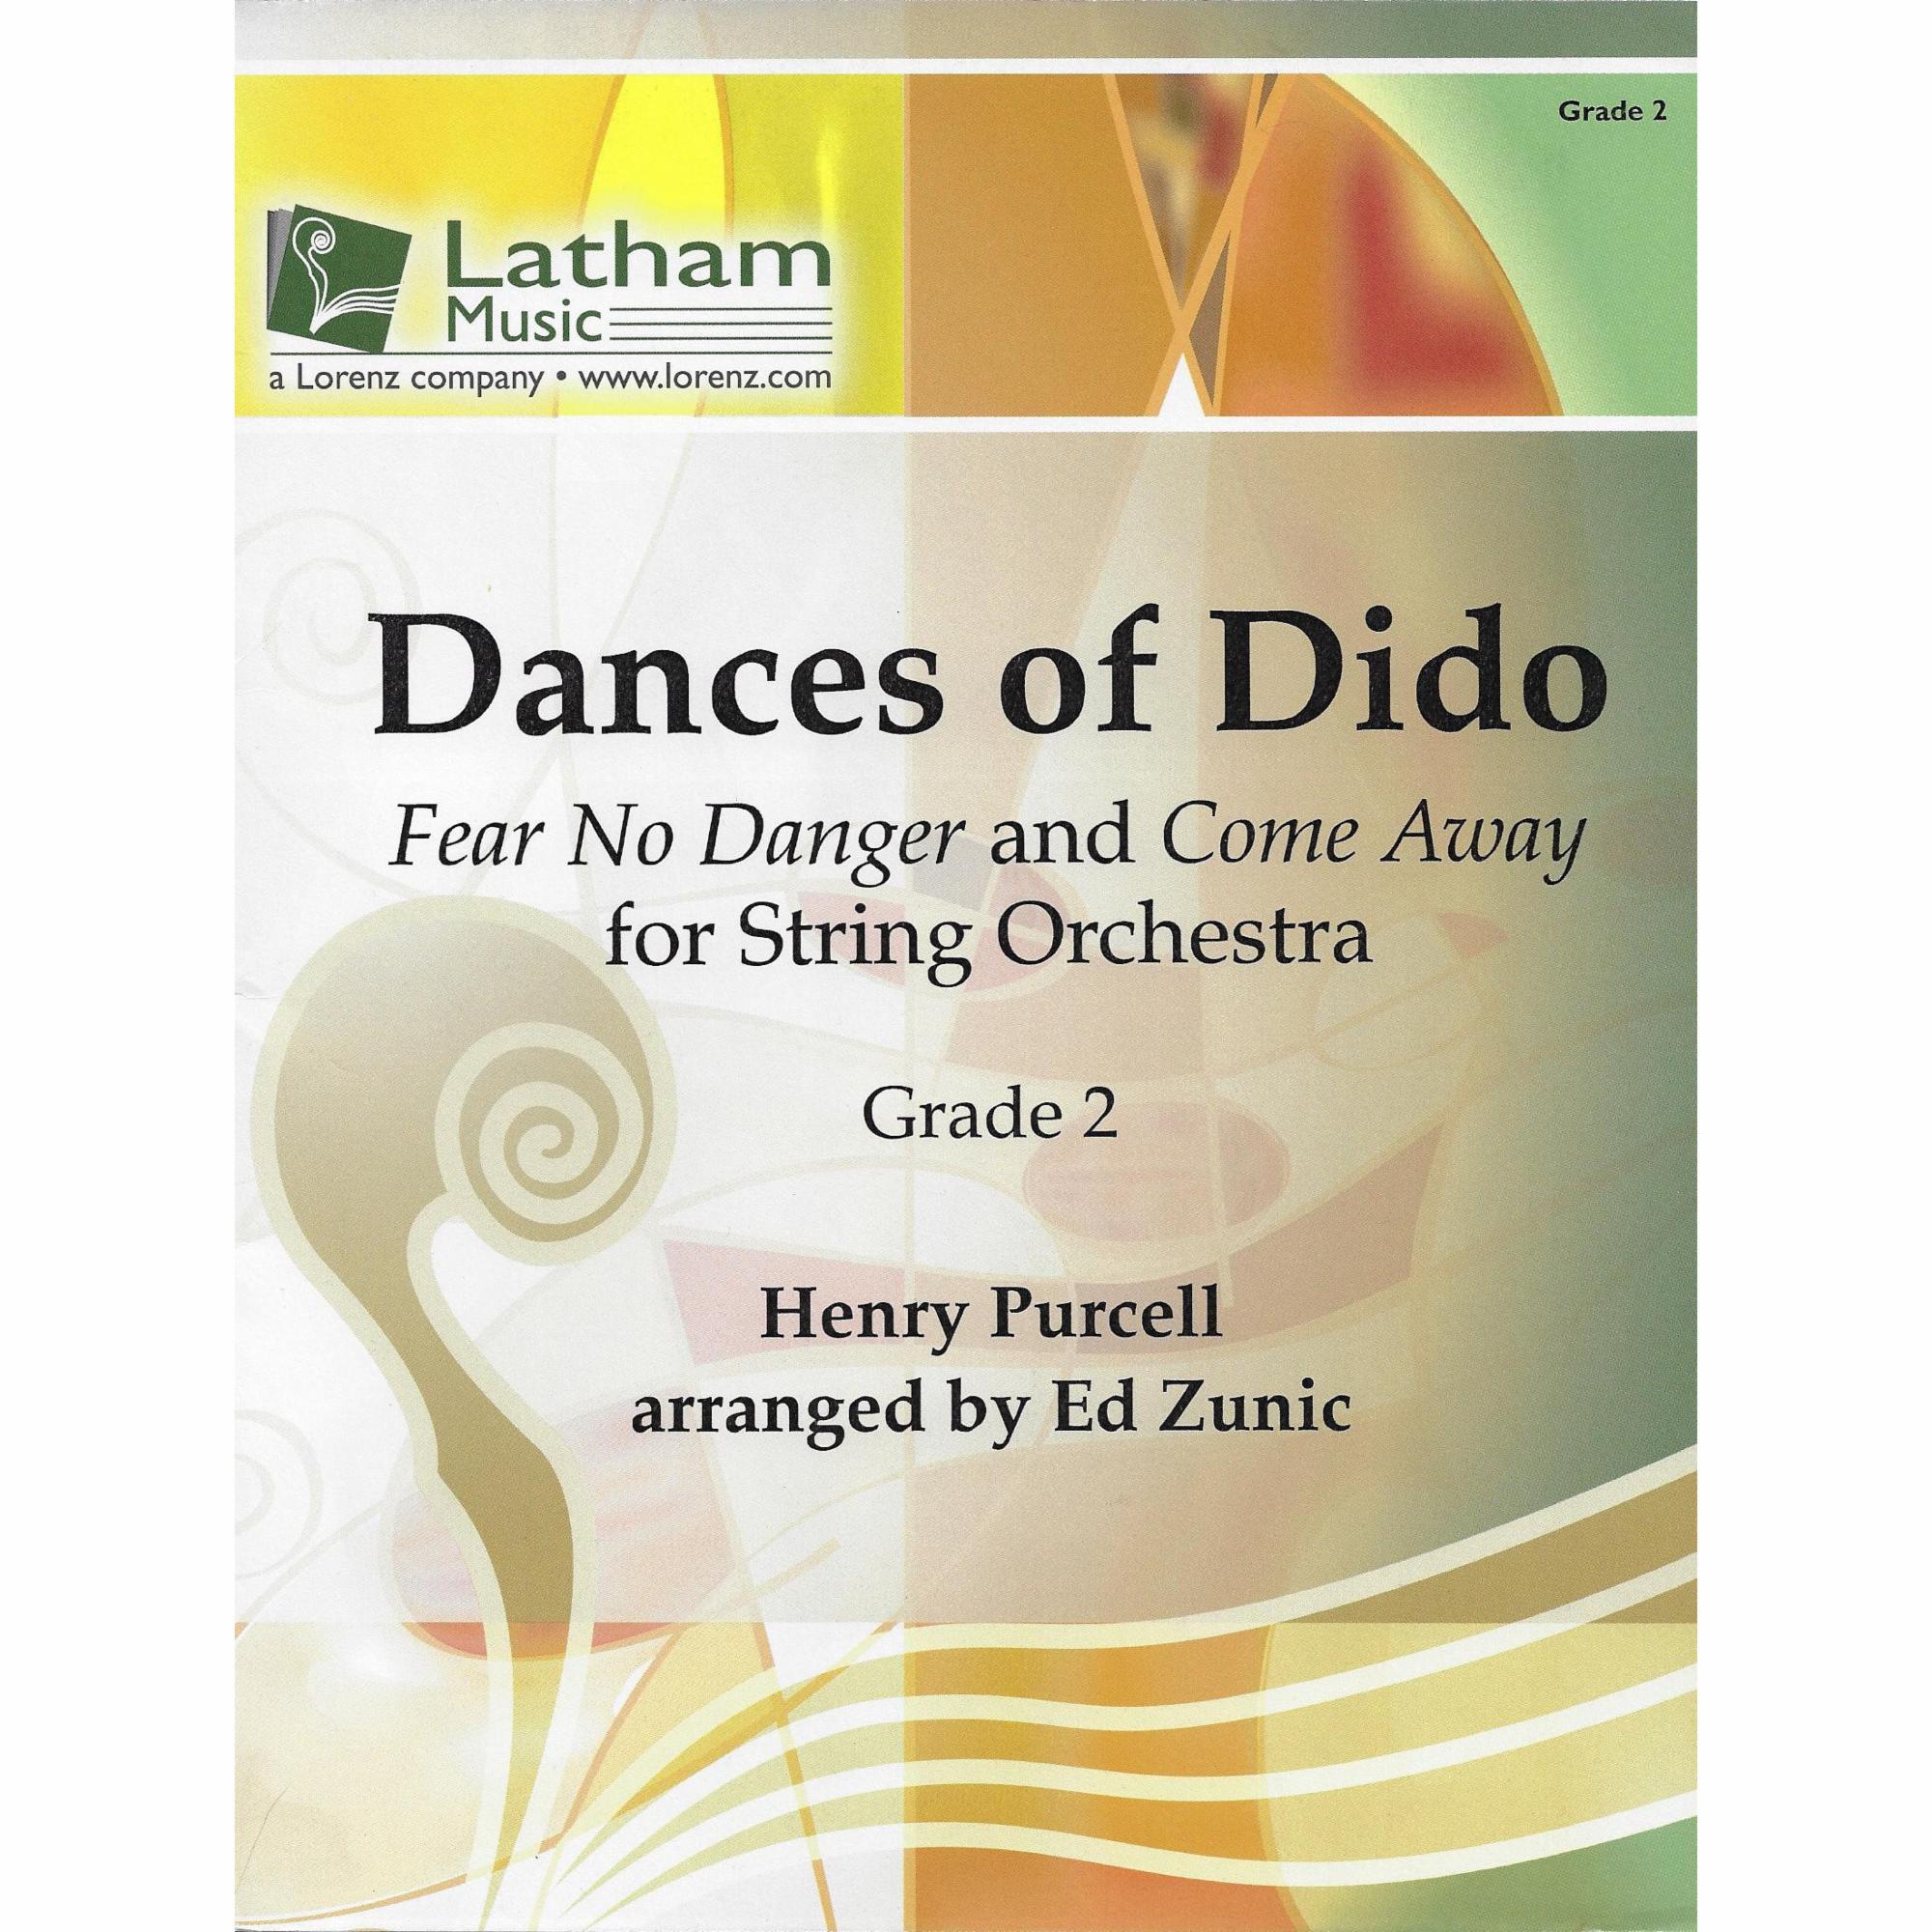 Dances of Dido for String Orchestra